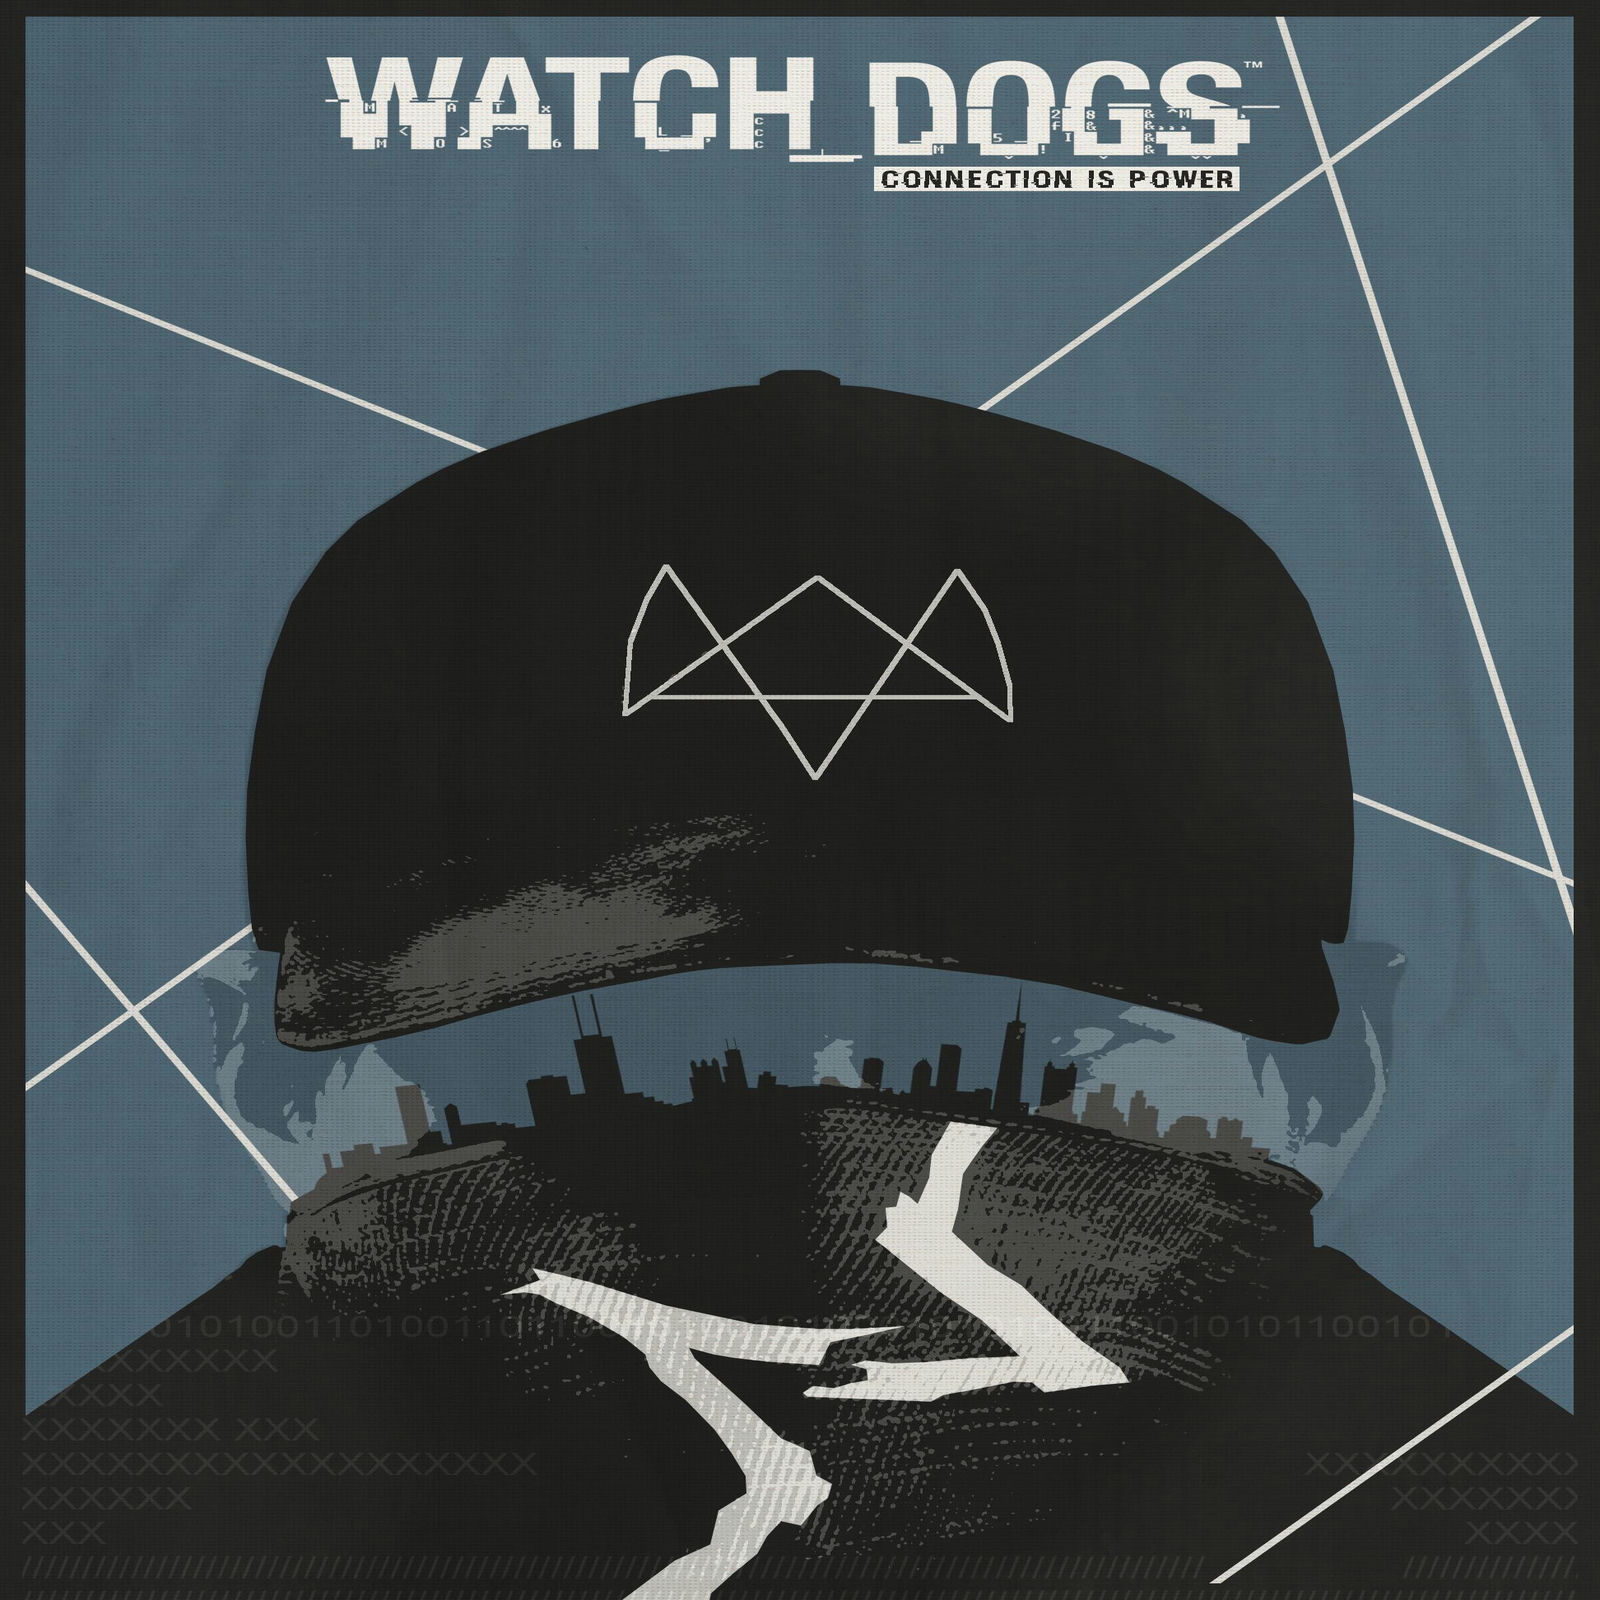 Random Time! Watch Dogs Poster